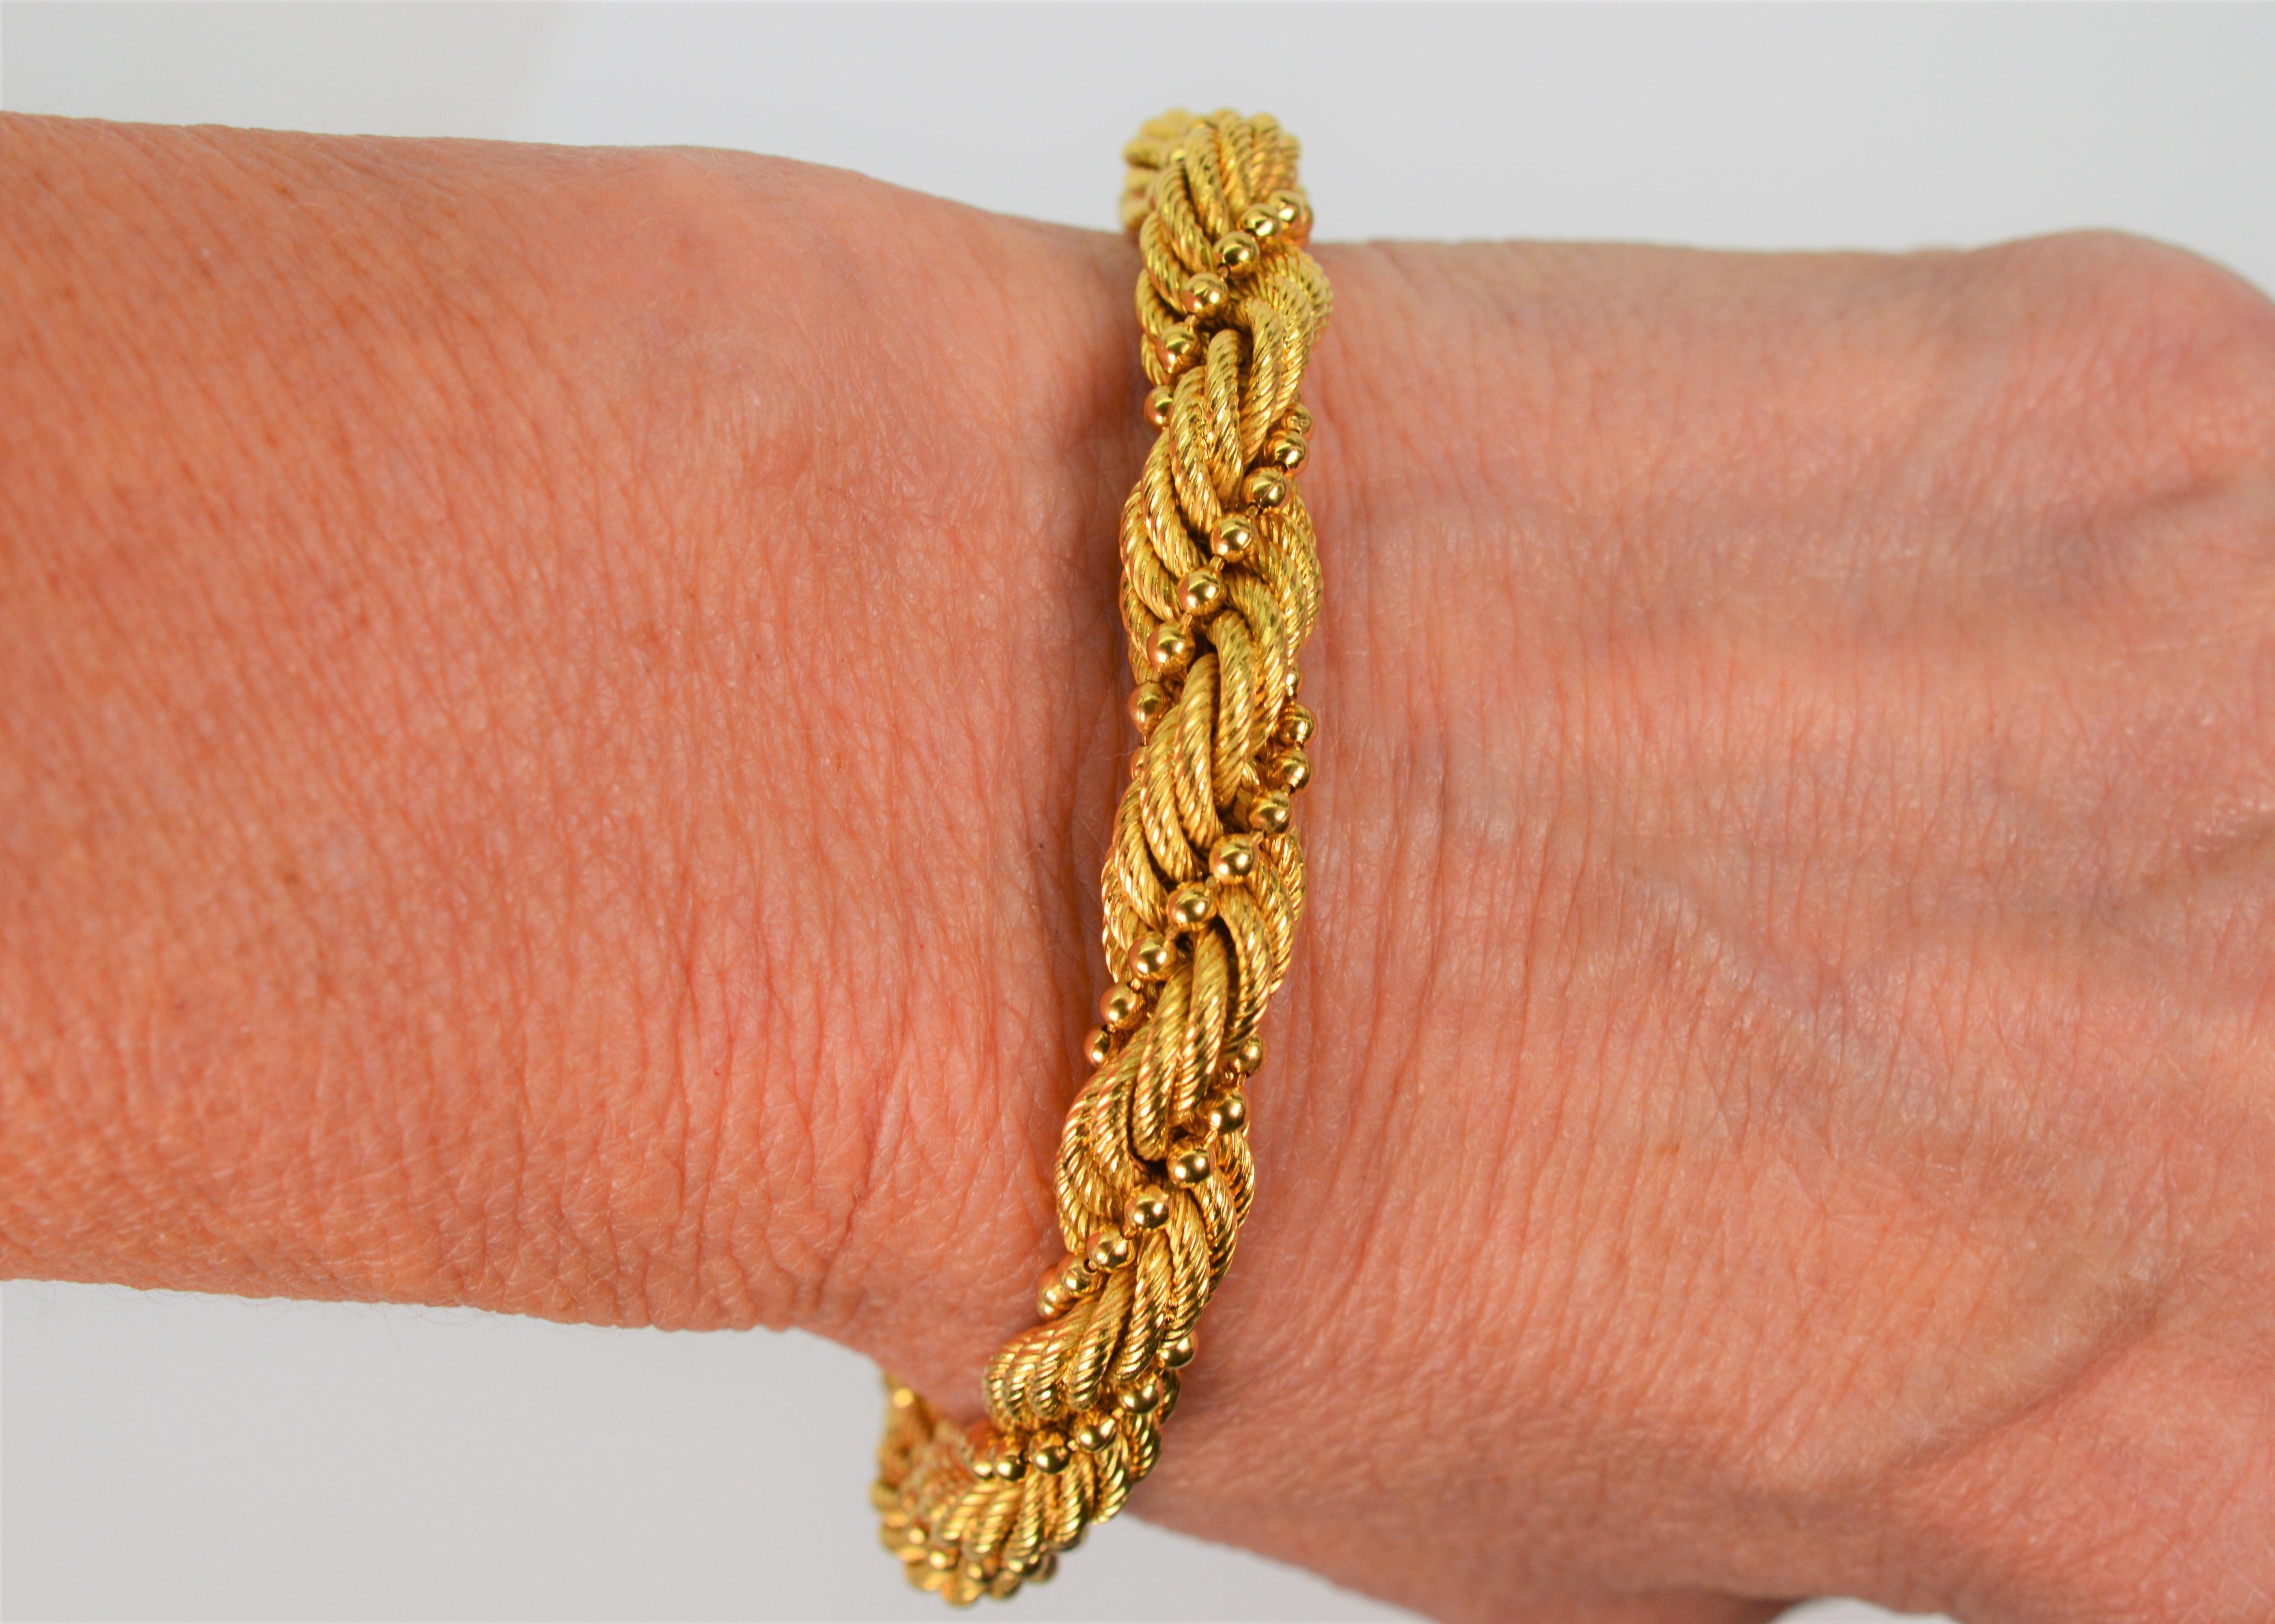 18 Karat Yellow Gold Braided Rope Twist Bracelet In Excellent Condition For Sale In Mount Kisco, NY